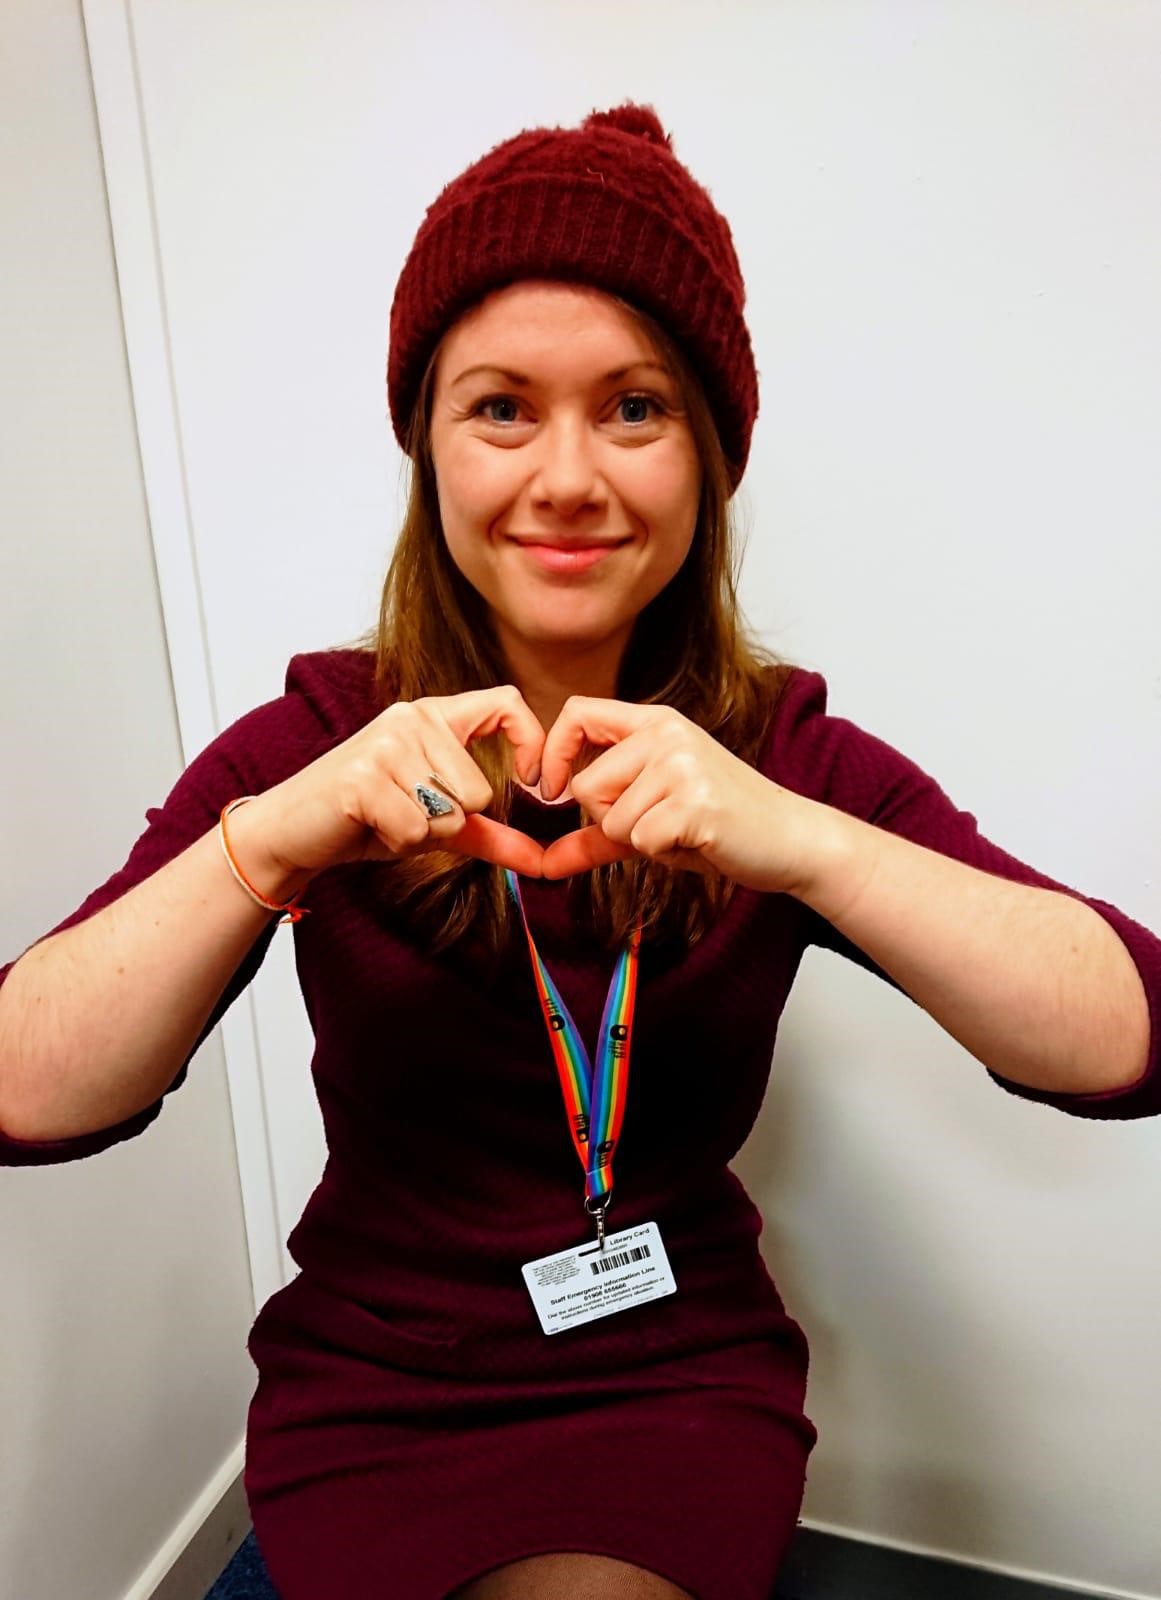 OU careers consultant Penny wearing red beanie